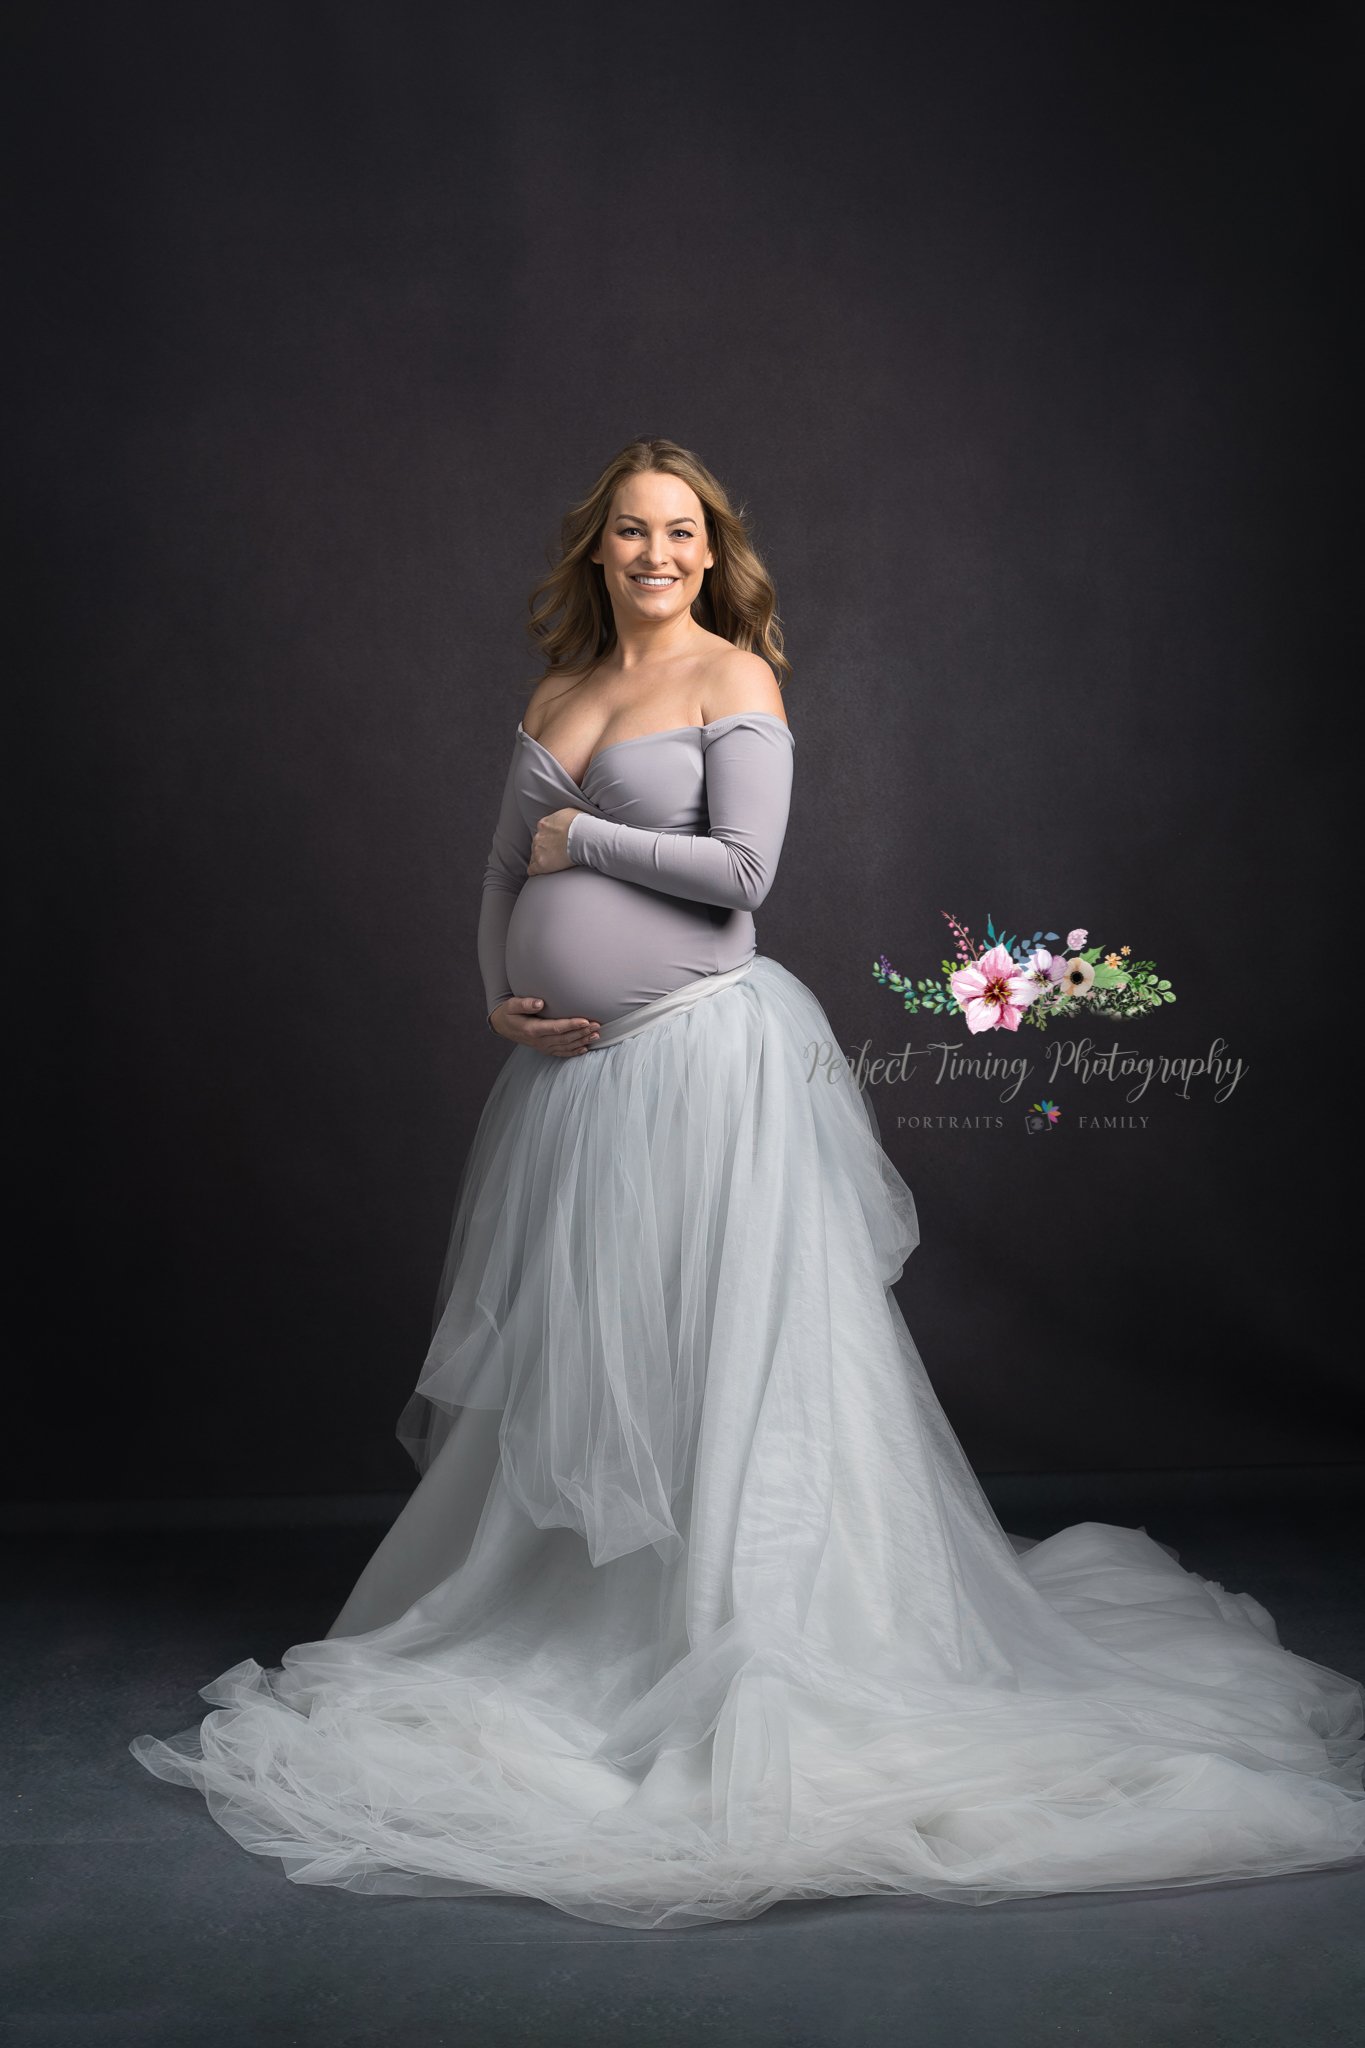 Maternity_Perfect Timing Photography_009.jpg